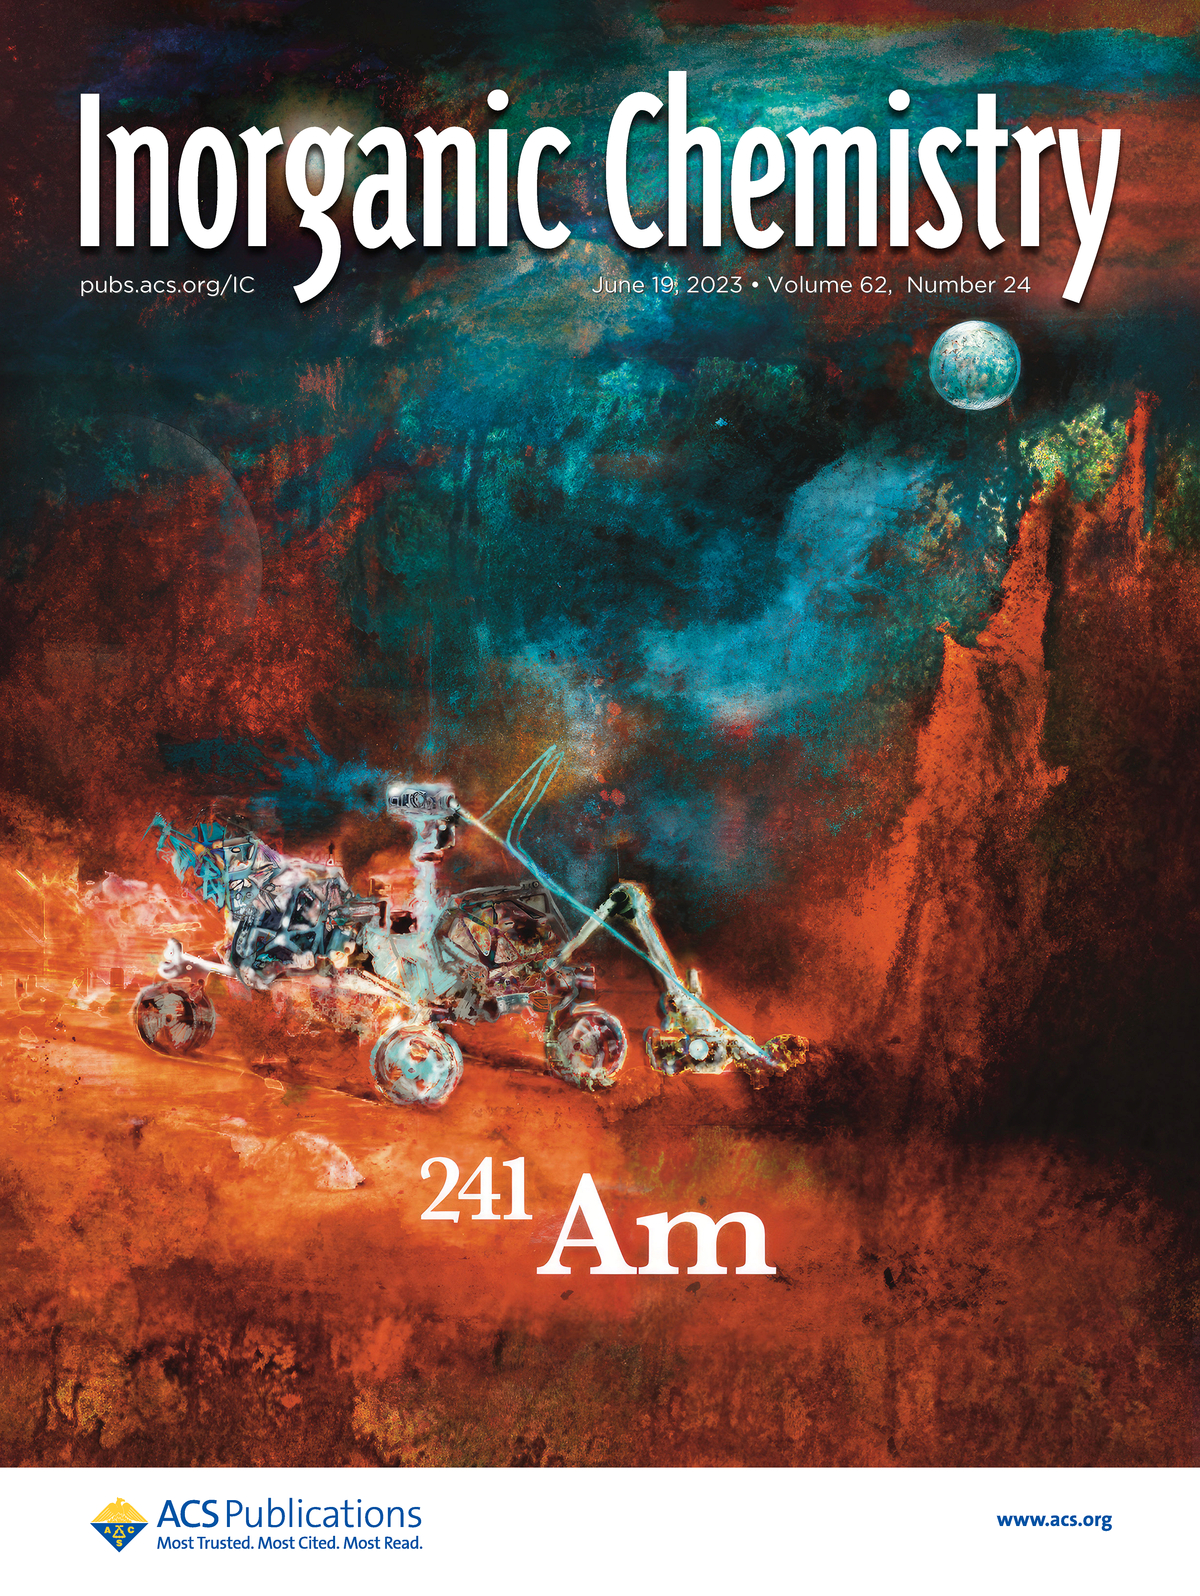 Inorganic Chemistry Cover page June 2023 Vol62 (24)